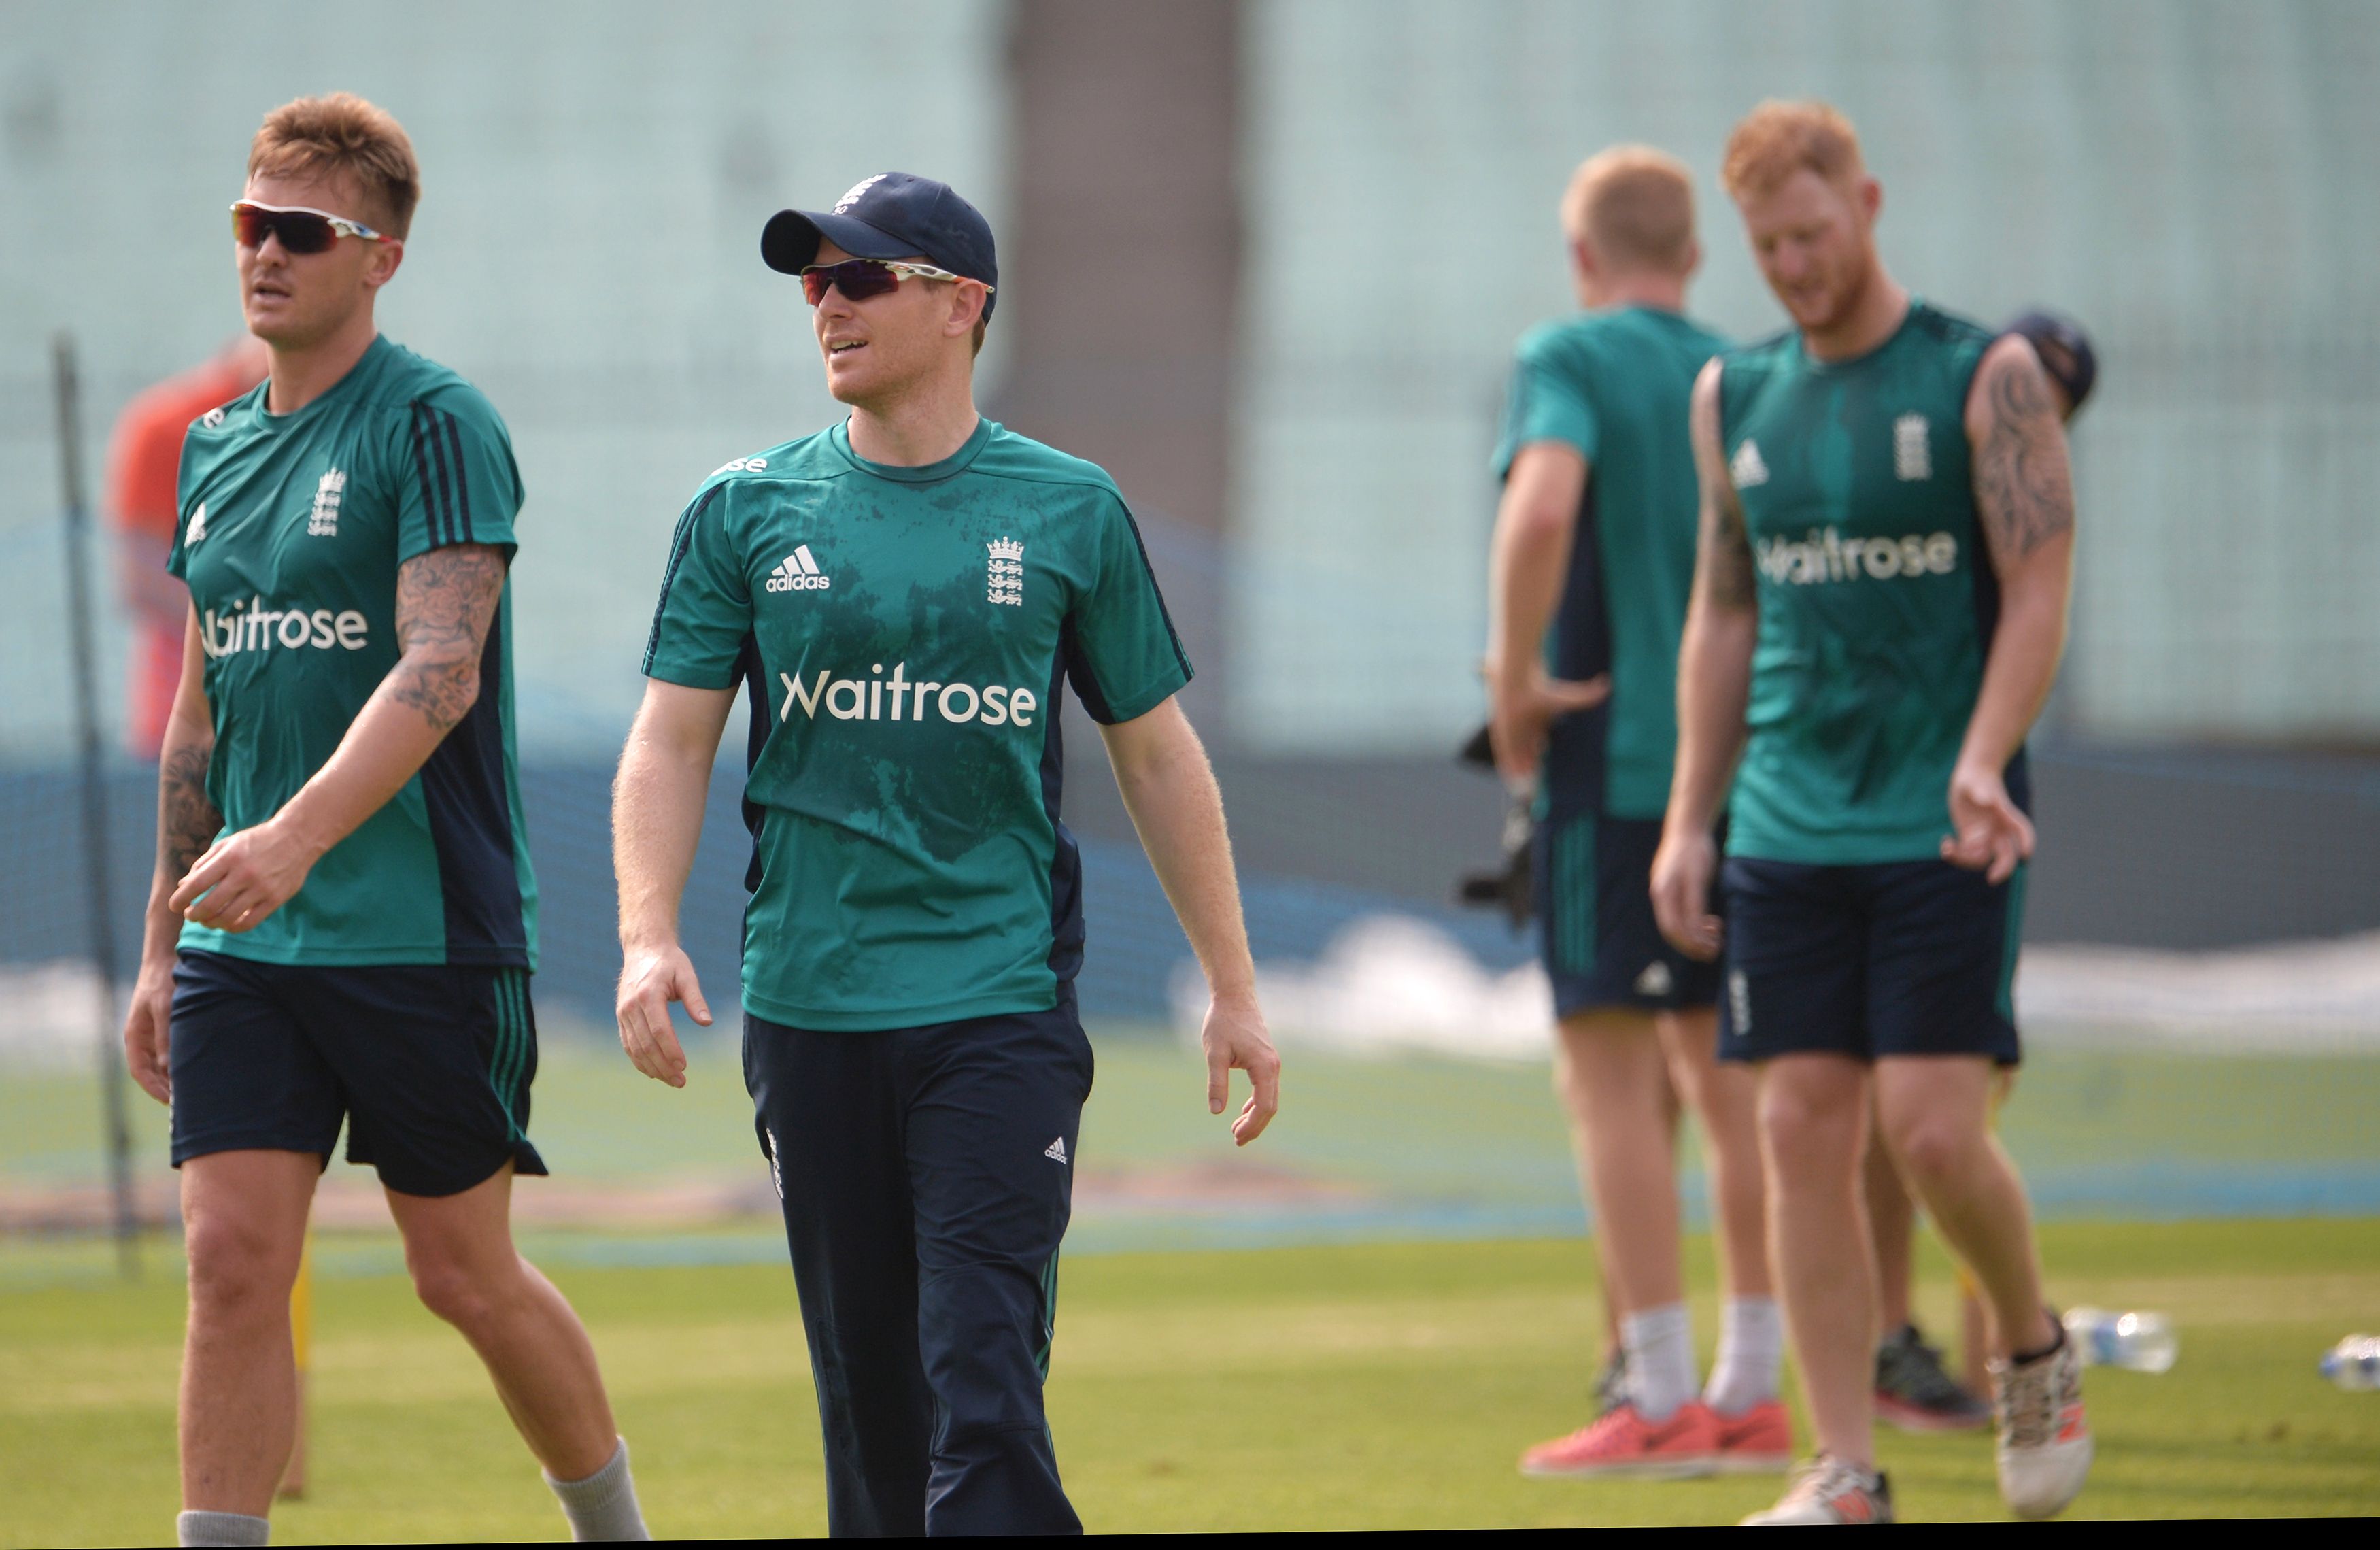 Different England to turn up in World T20 final - Morgan